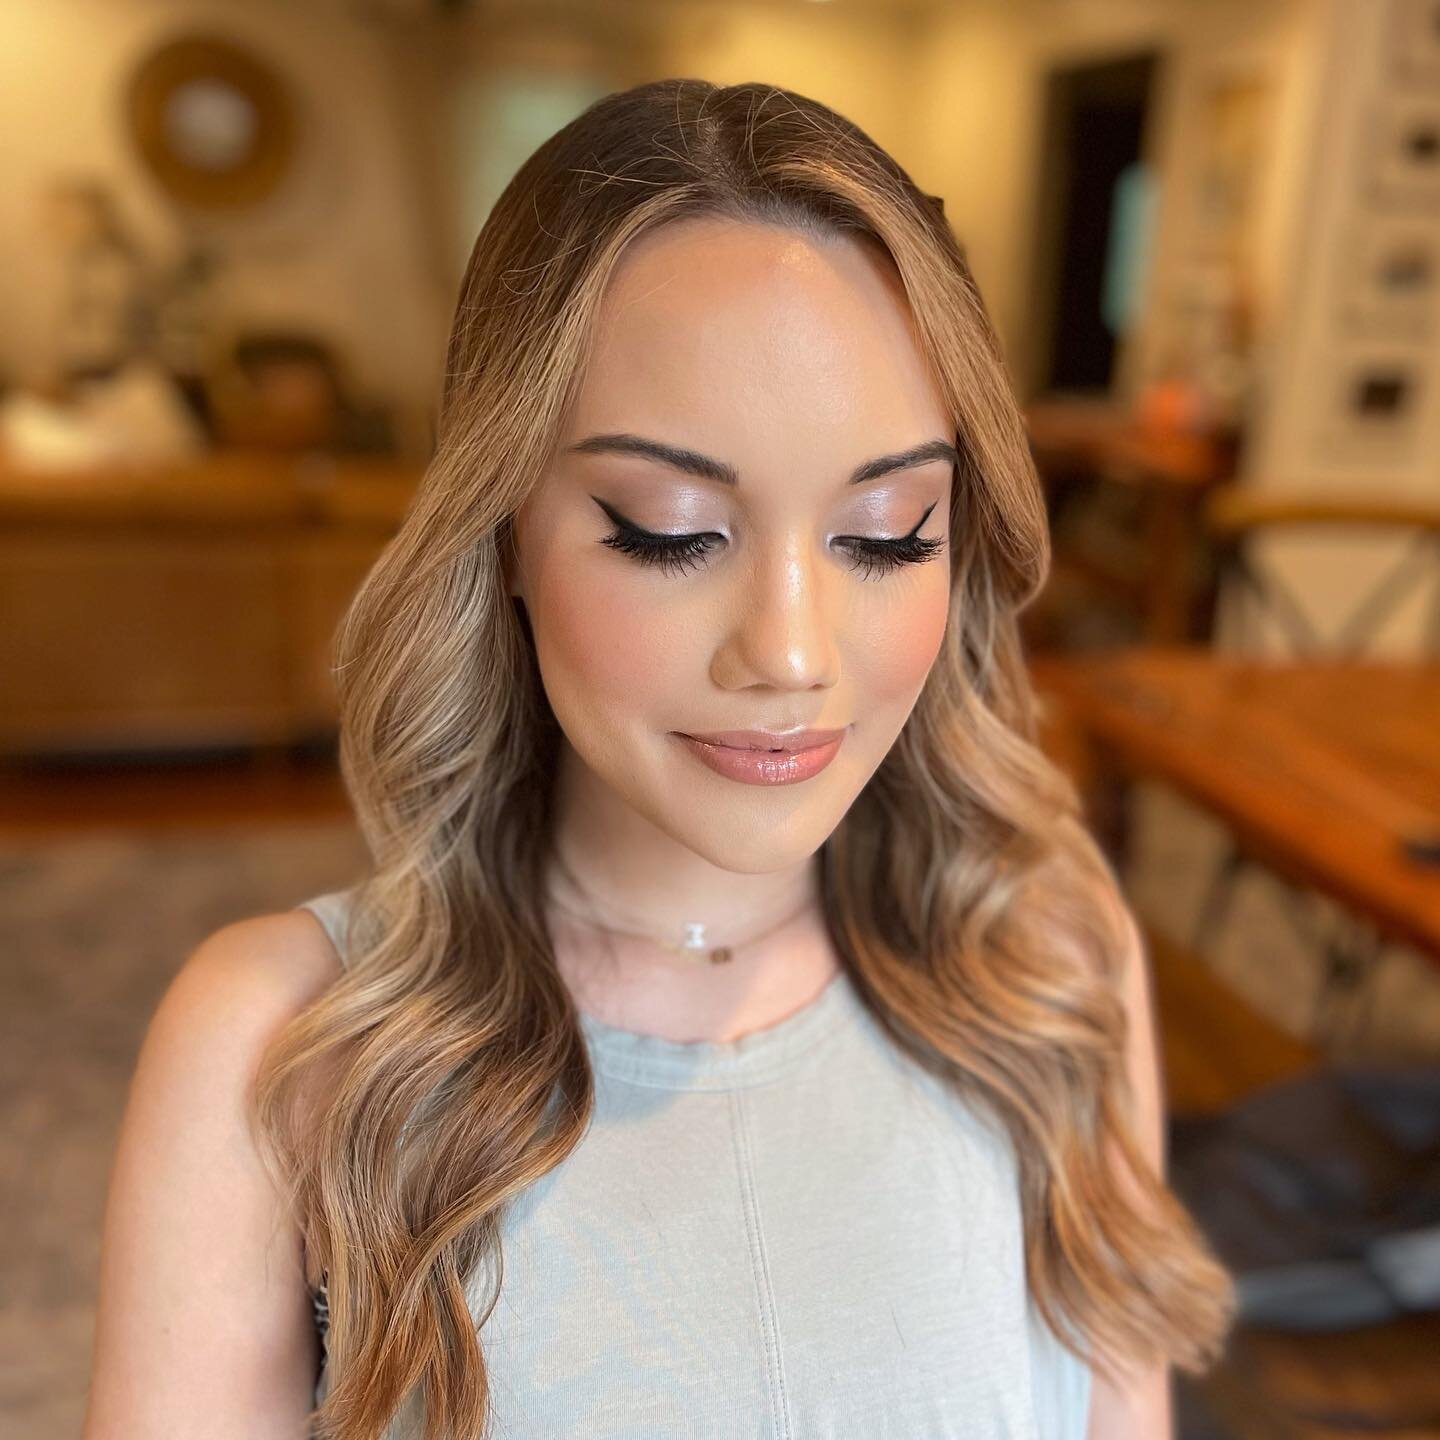 Got this beauty ready for a fun dinner with a smokey wing &amp; a soft eye featuring some of my favorites from @ctilburymakeup 🥂

#MakeupByMelanie #mua #charlottetilbury #destinationmakeupartist #travelmakeupartist #nolamua #neworleansmakeupartist #